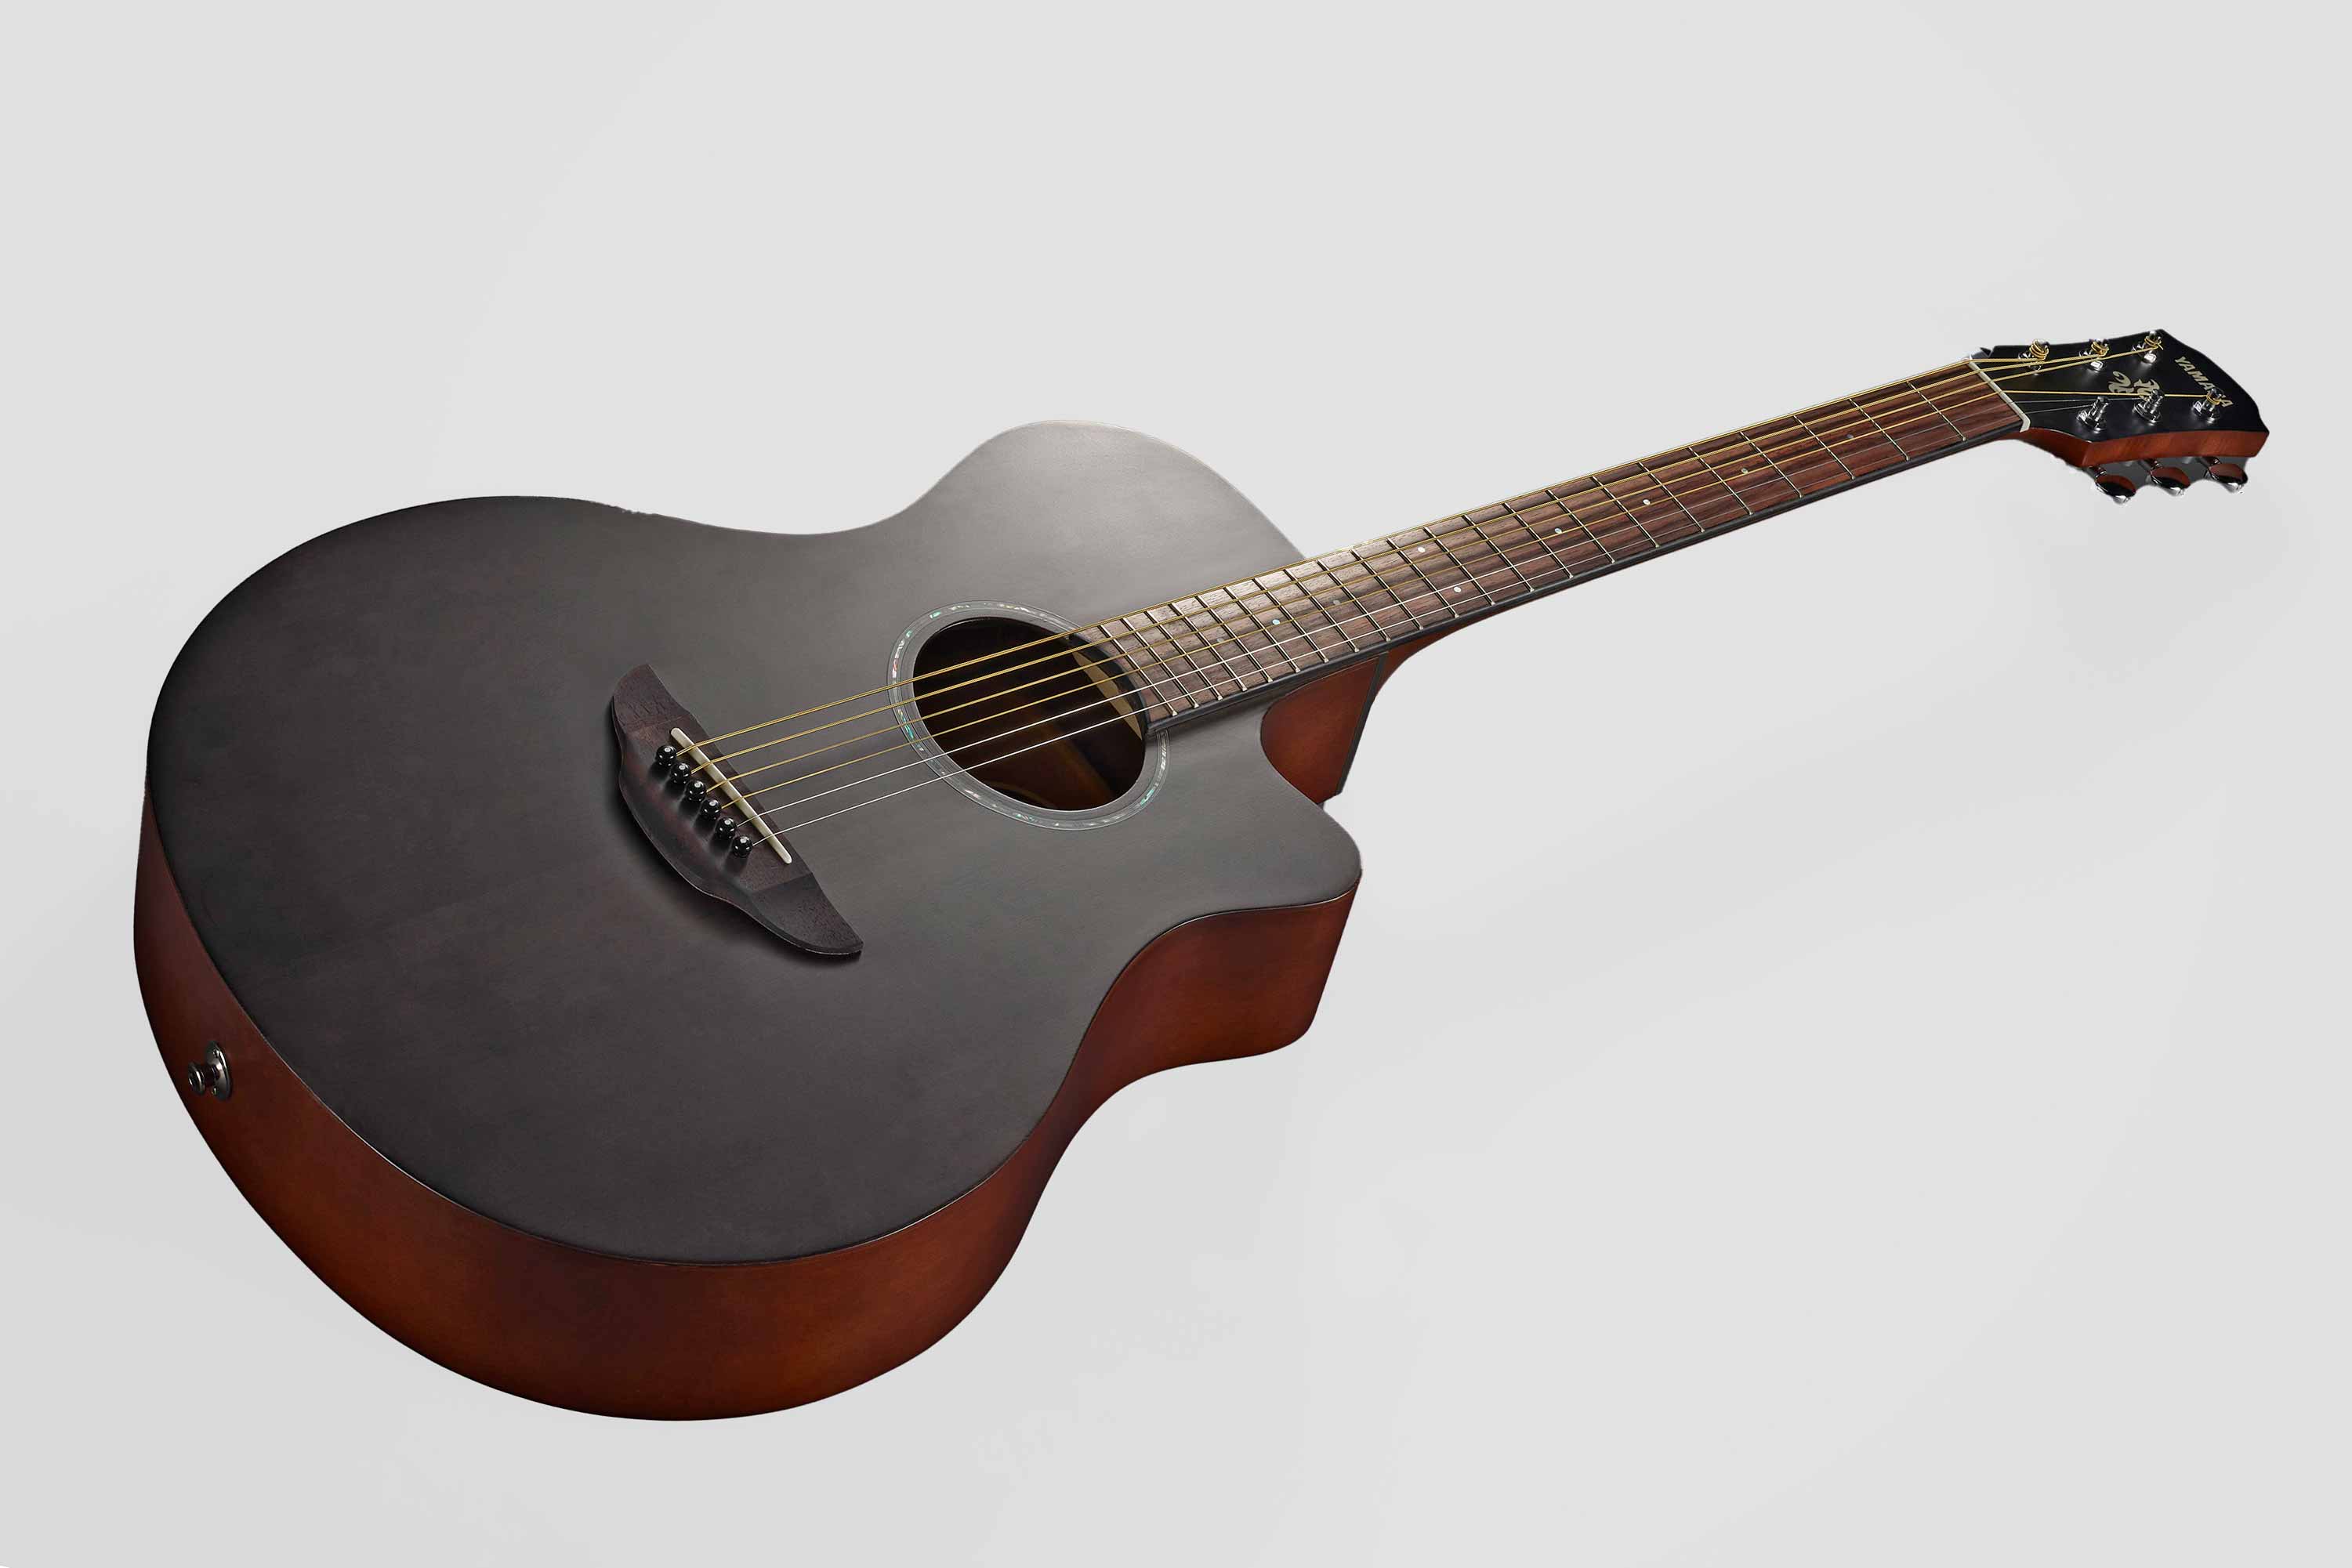 Yamaha Guitars Introduces the APX600 and CPX600 - Premier Guitar